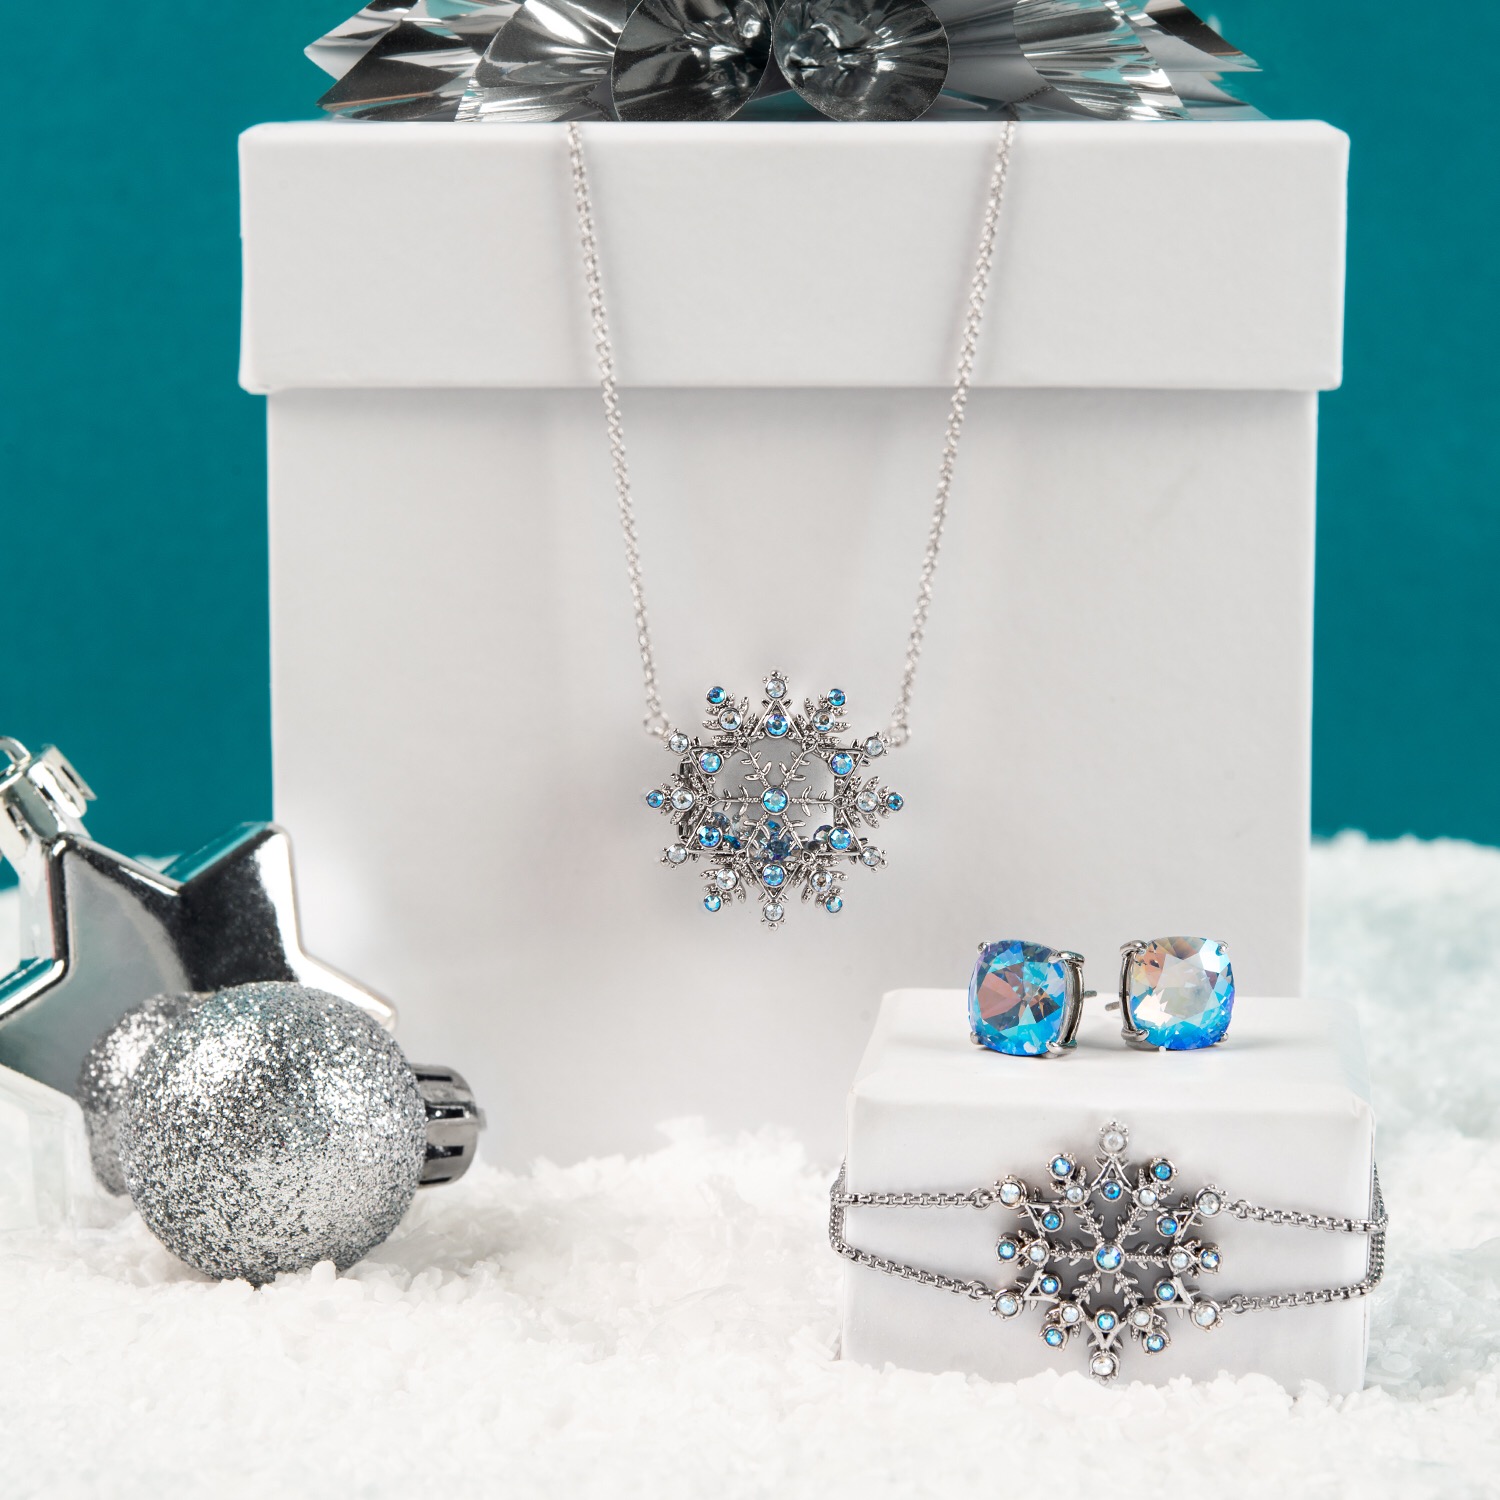 Charm Bracelets by Origami Owl Make the Perfect Gift! - Origami